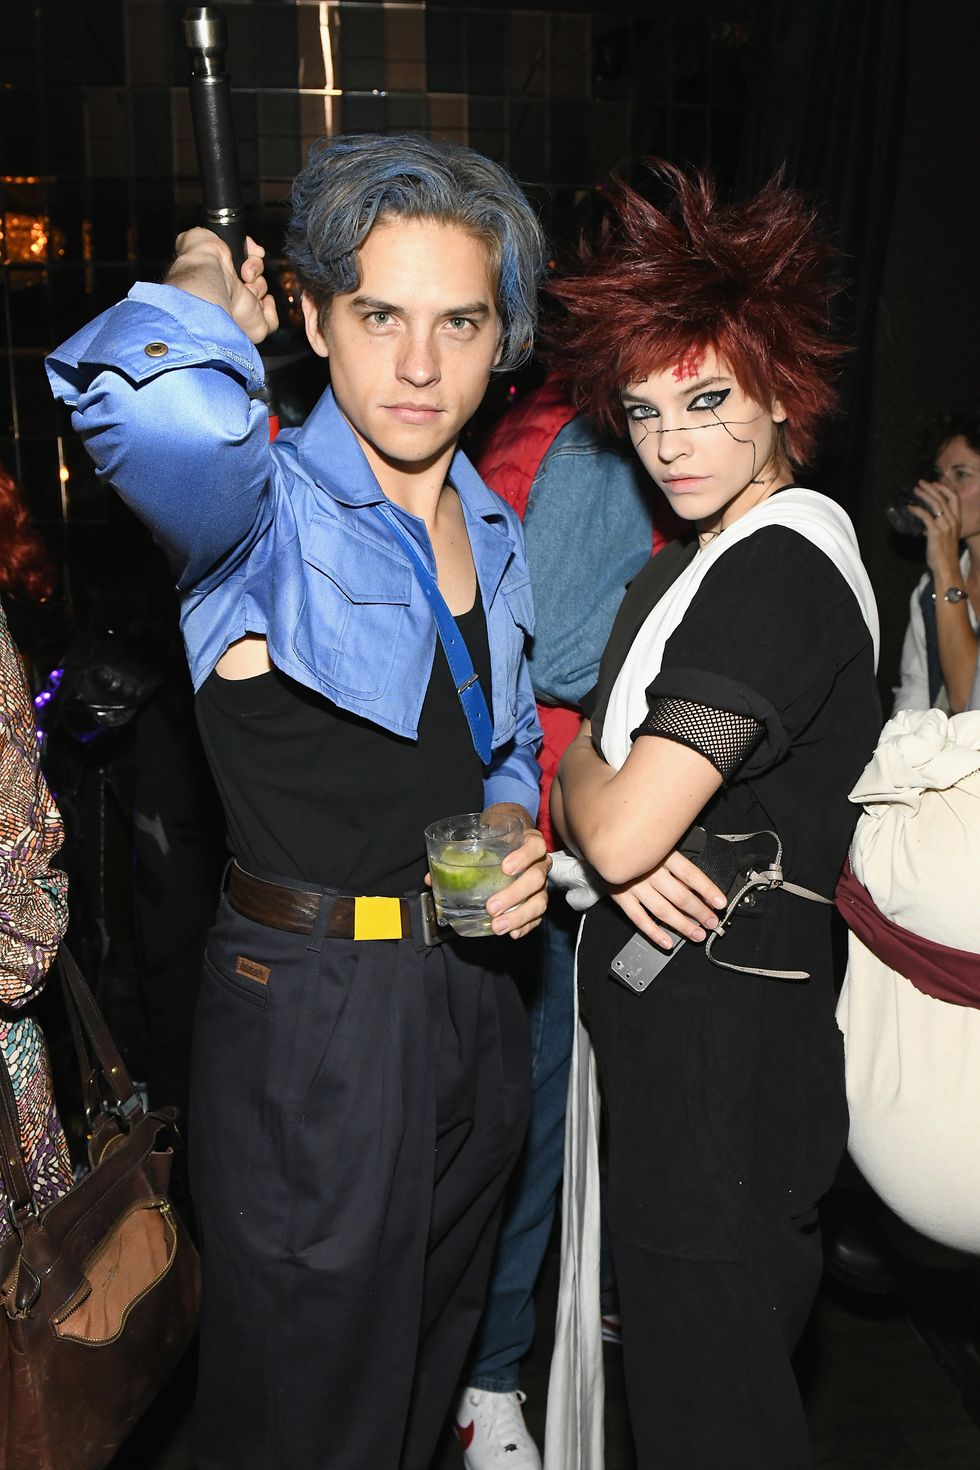 Heidi Klum's 19th Annual Halloween Party Sponsored By SVEDKA Vodka And Party City At Lavo NYC